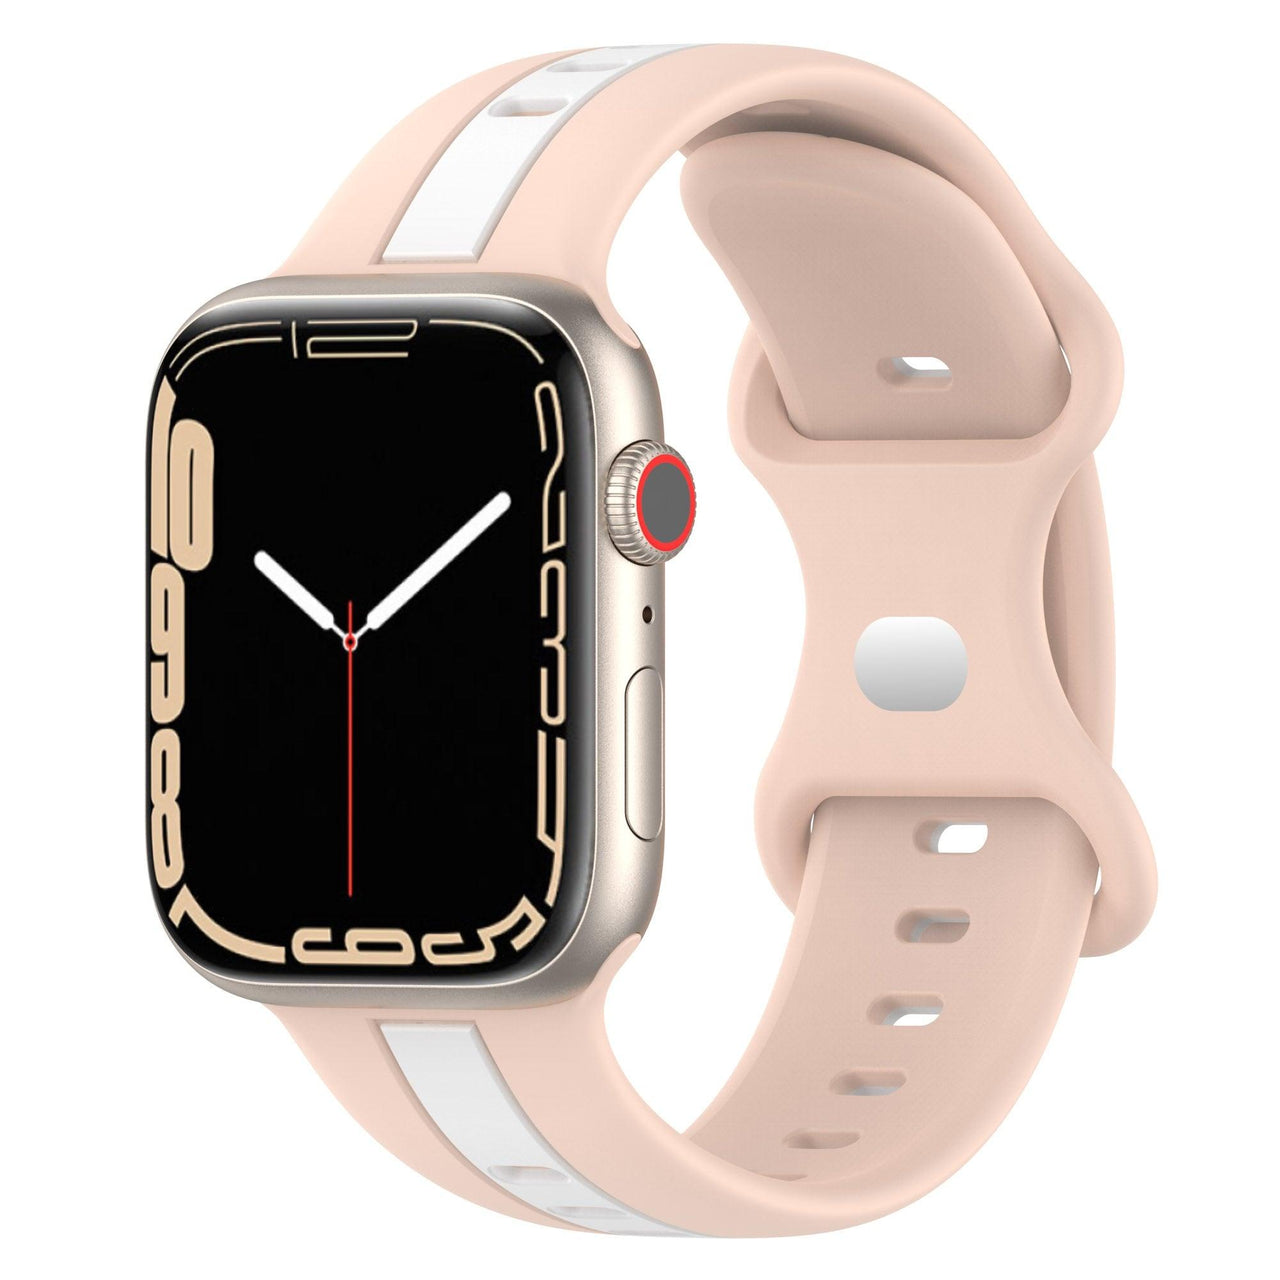 Striped Silicone Bracelet for Apple Watch - watchband.direct